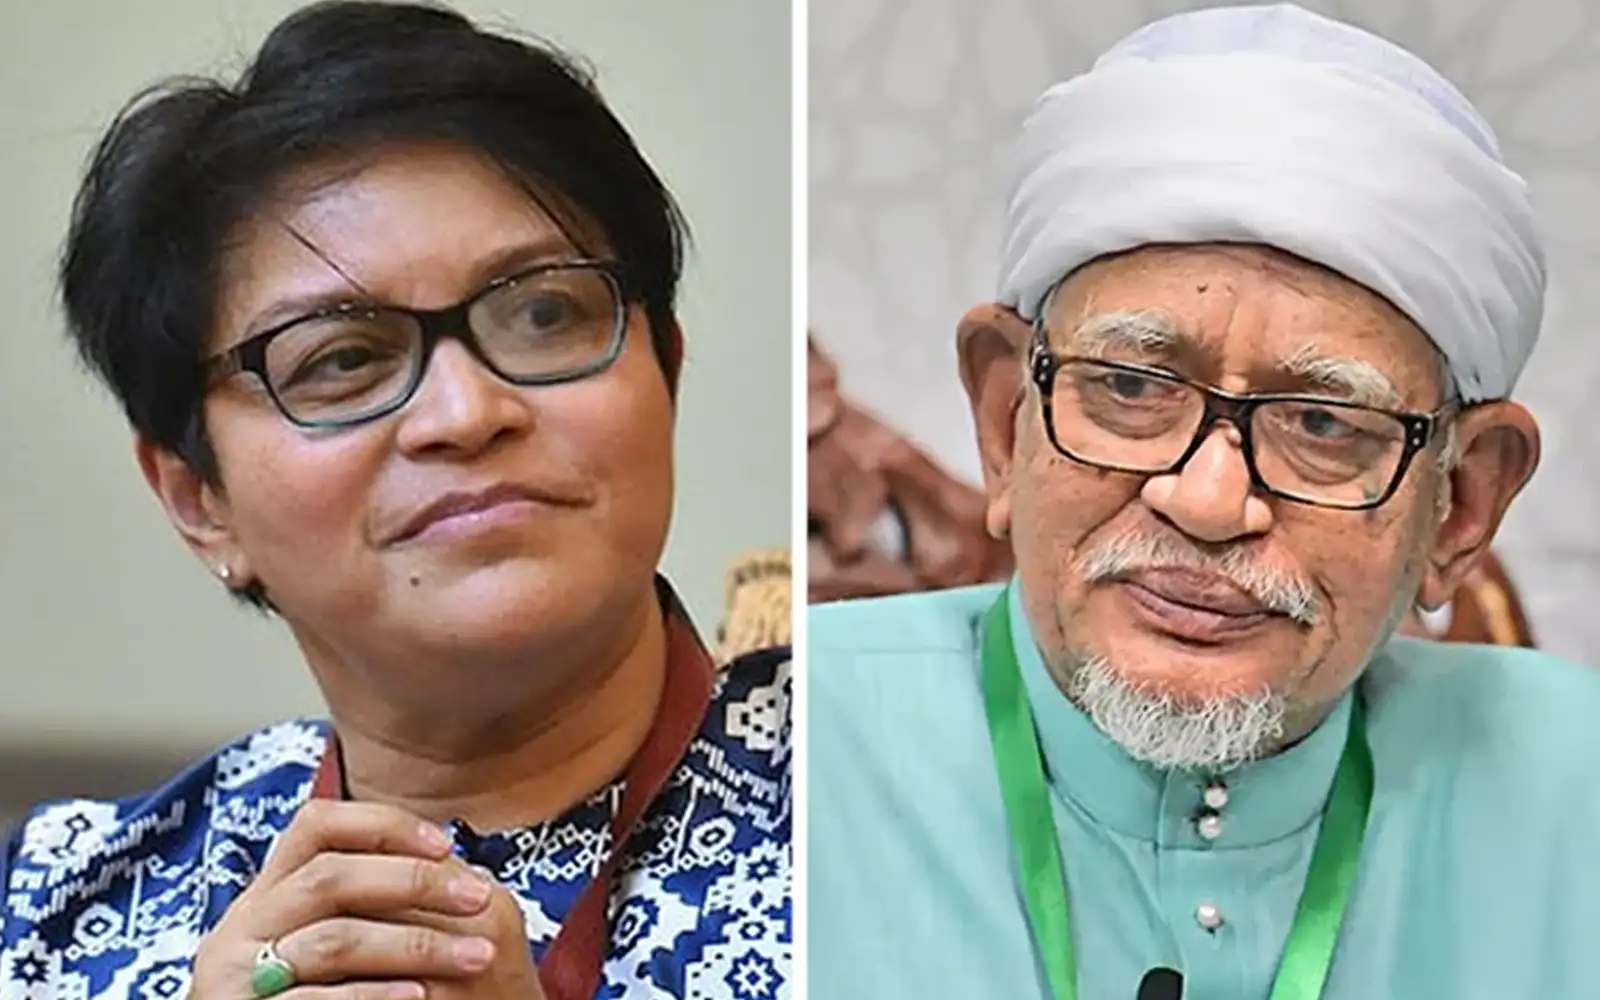 azalina to pas: why call dap ‘extremist’ now, after being allies?